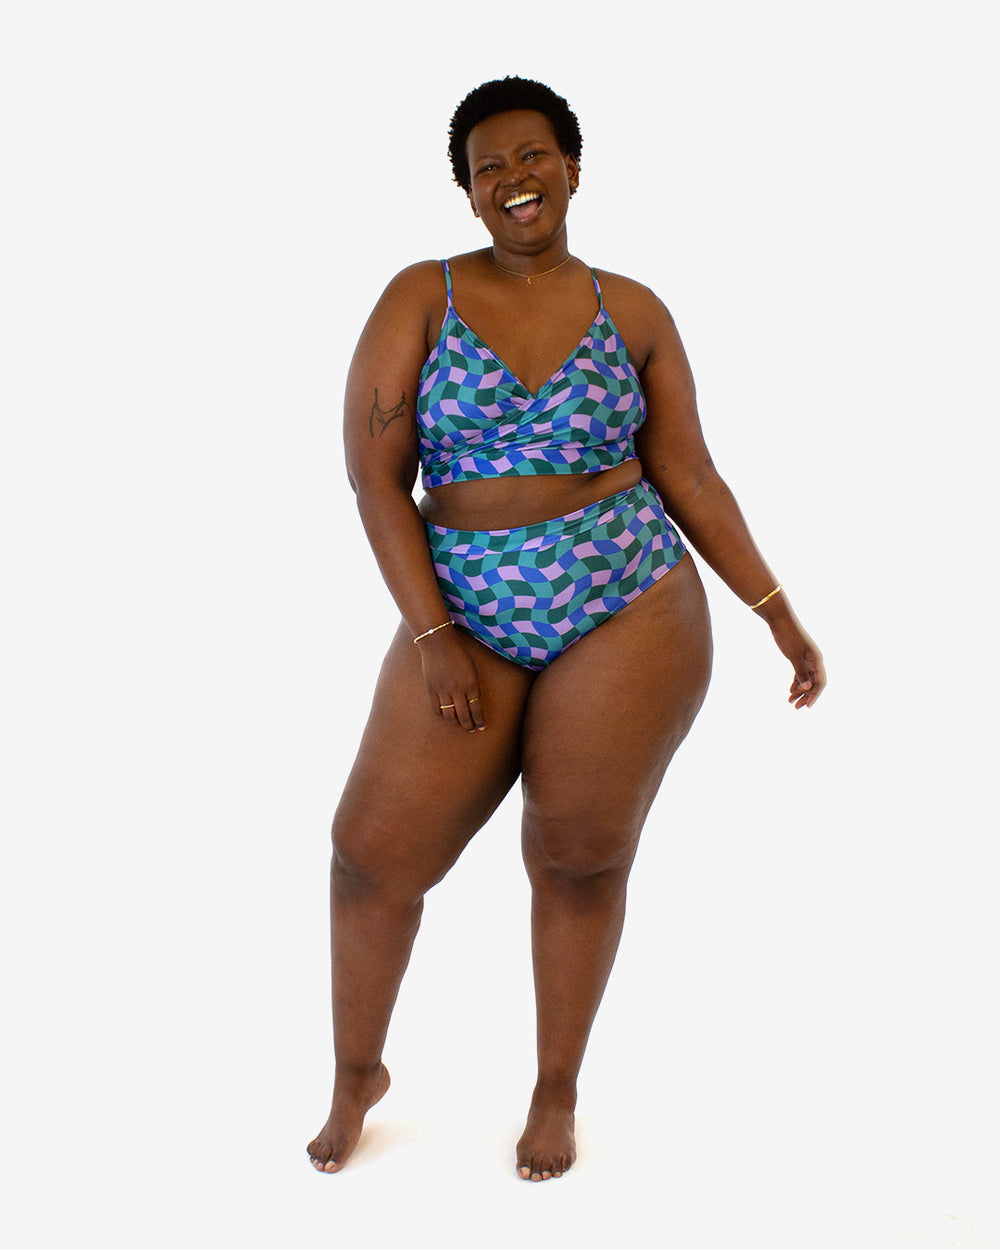 Woman wearing the Sunstar Swimsuit sewing pattern from Helen’s Closet on The Fold Line. A two piece swimsuit pattern made in swimwear stretch knit fabric, featuring a top with a crossover front and thin shoulder straps and high cut bottoms with a cheeky cut in the back.